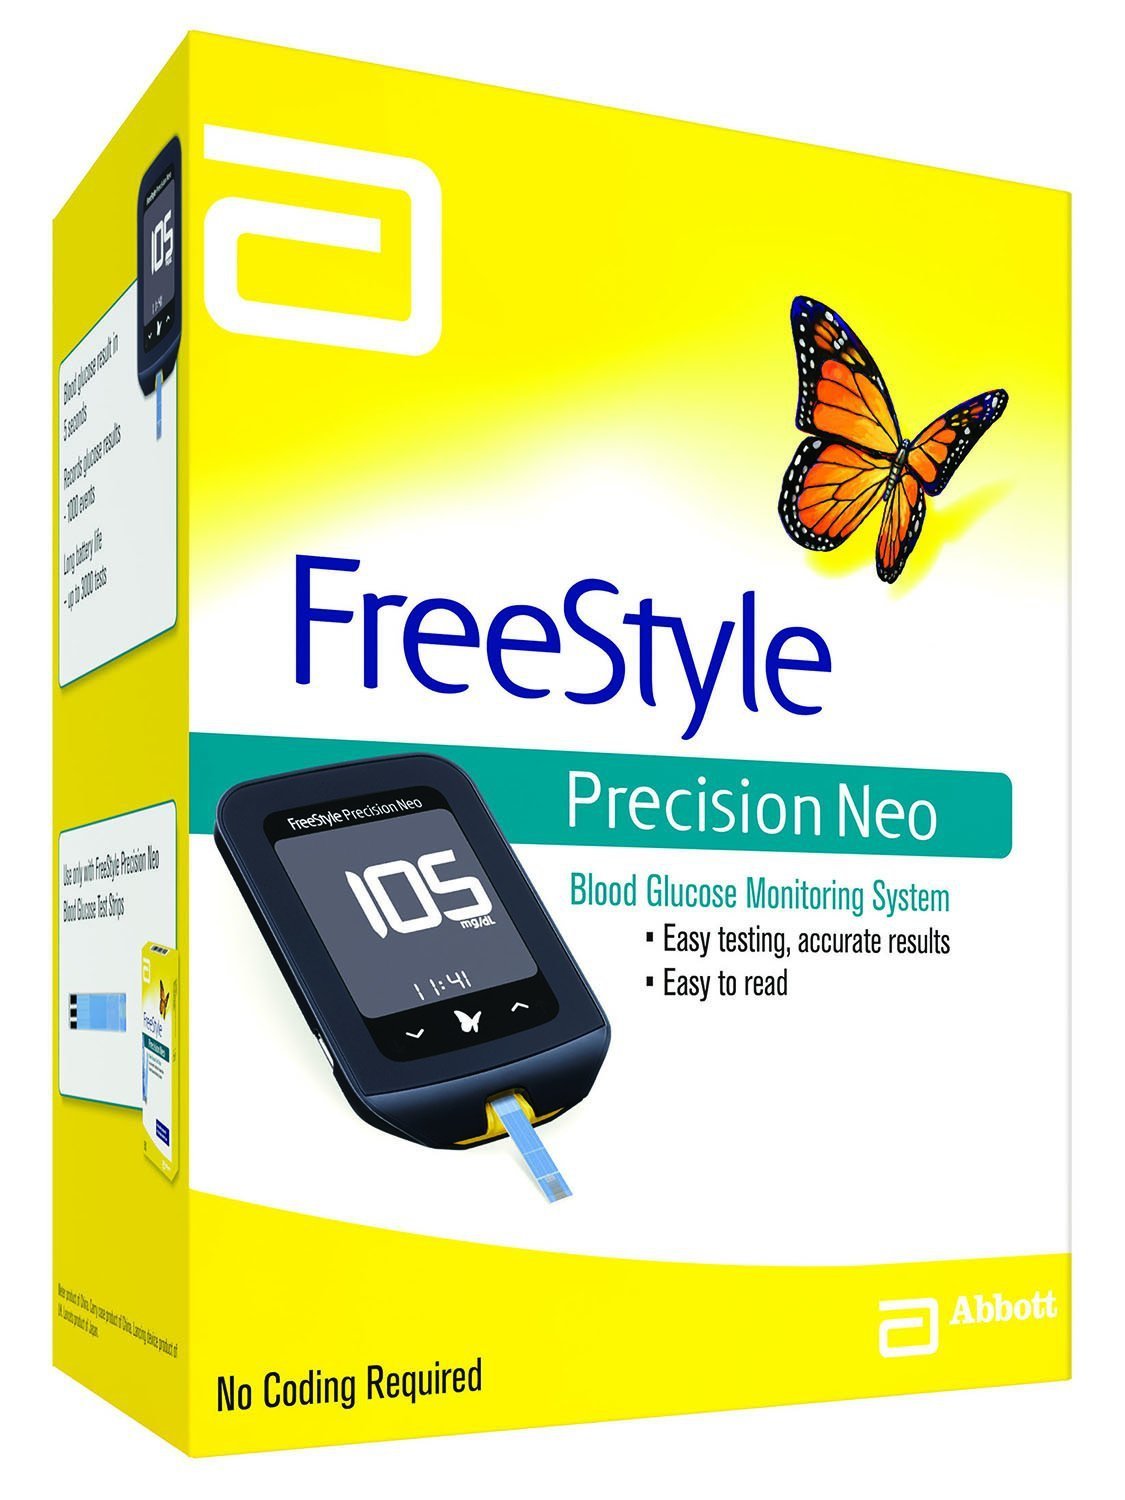 Freestyle Precision Neo Blood Glucose Monitoring System - image 2 of 4